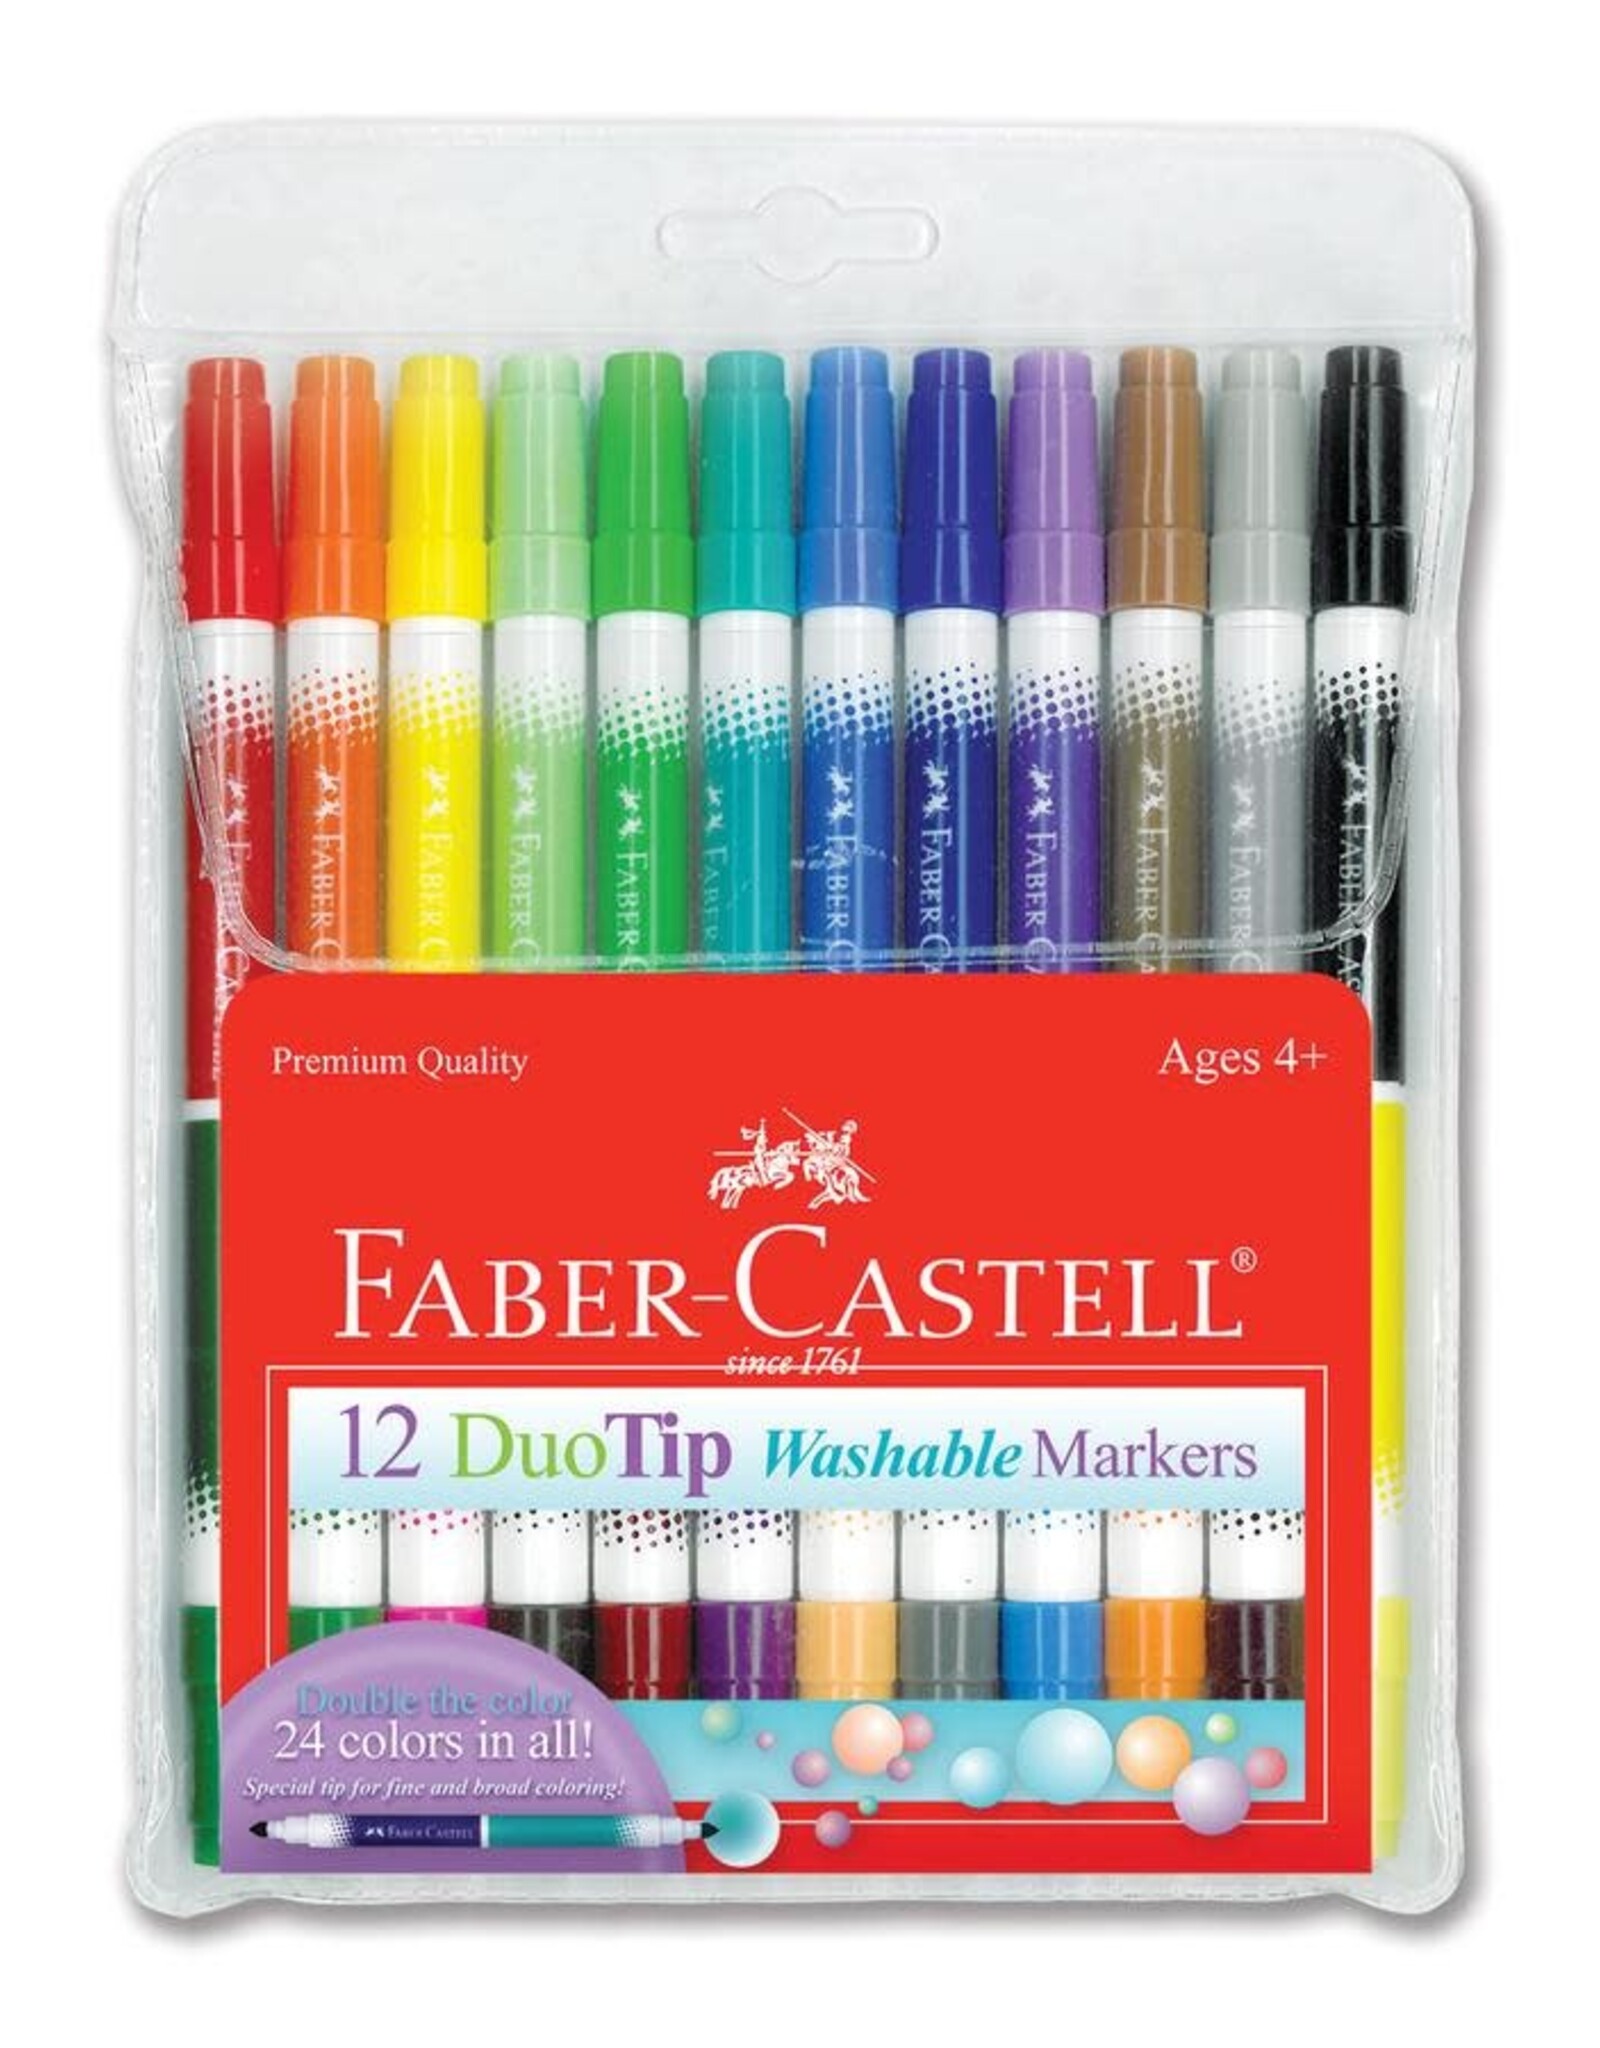 Faber Castell 12ct DuoTip Washable Markers